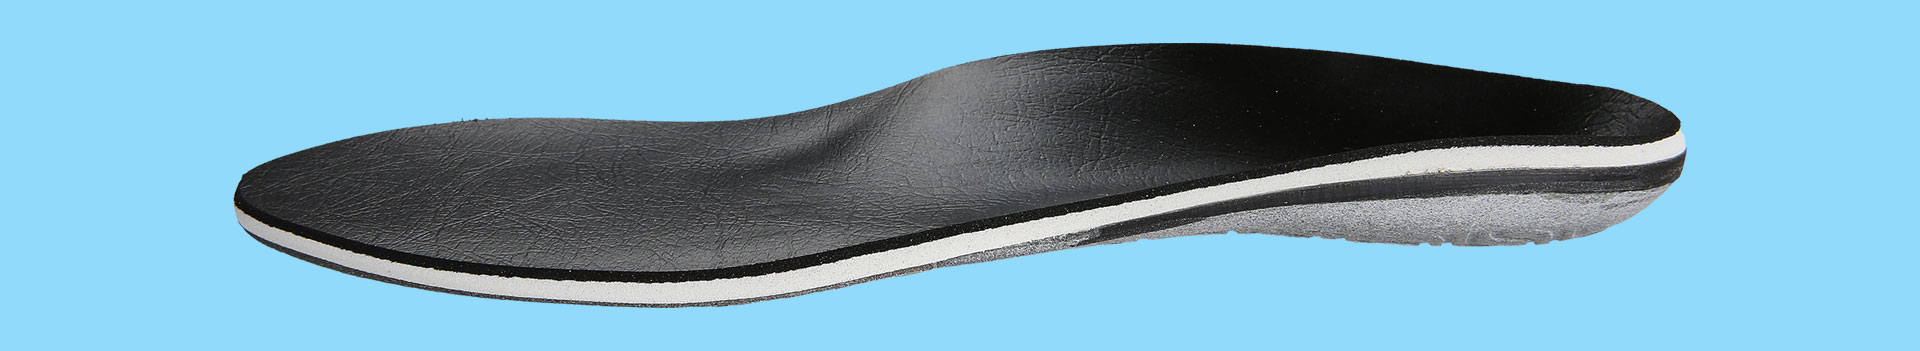 F3 Orthotic side view